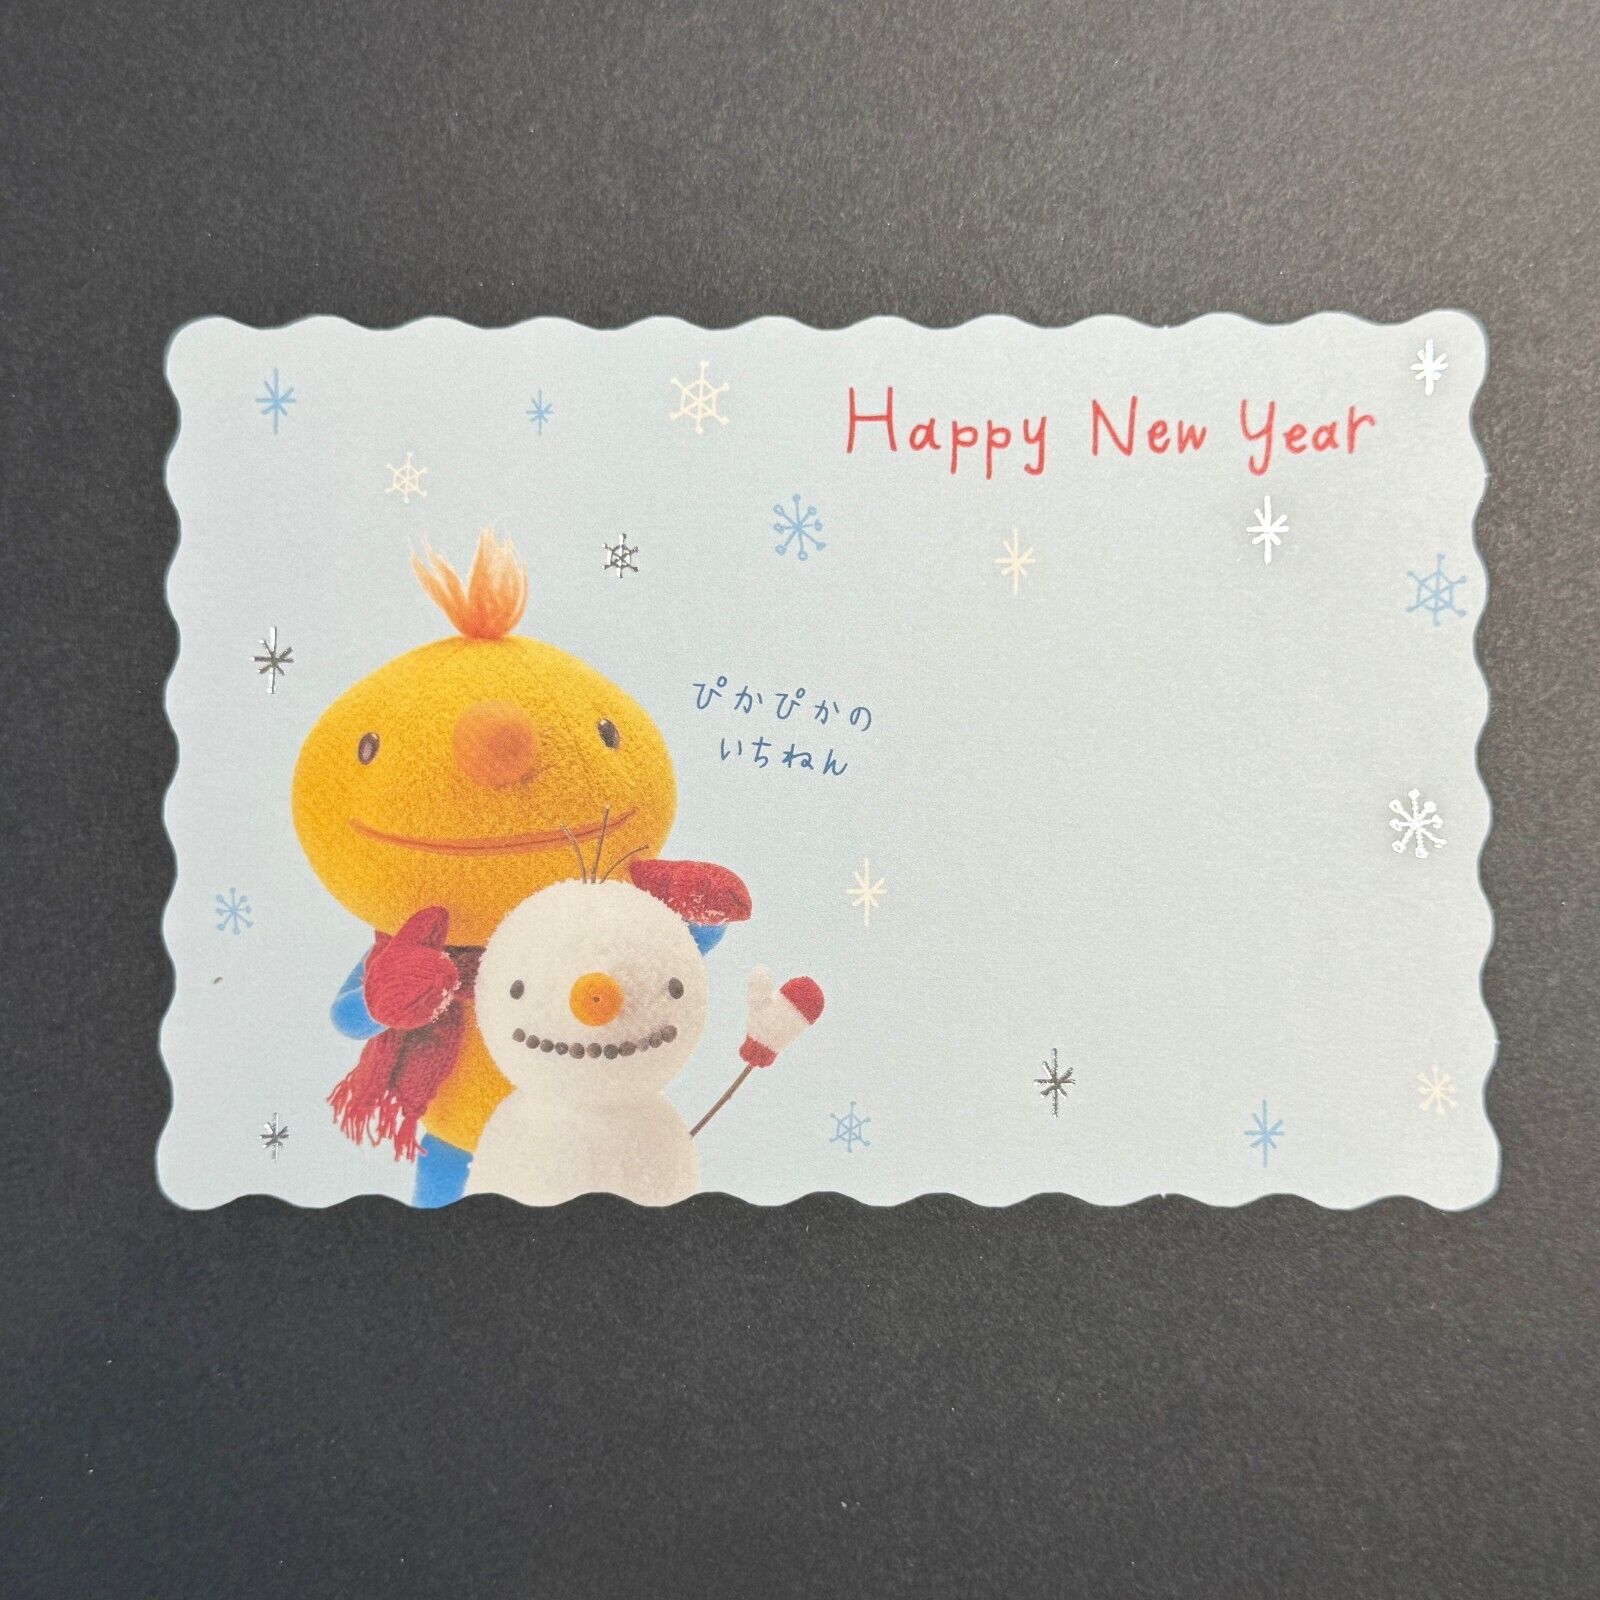 Postcard - Happy New Year - A Shiny Year  Made in Japan SANRIO 2001-2003